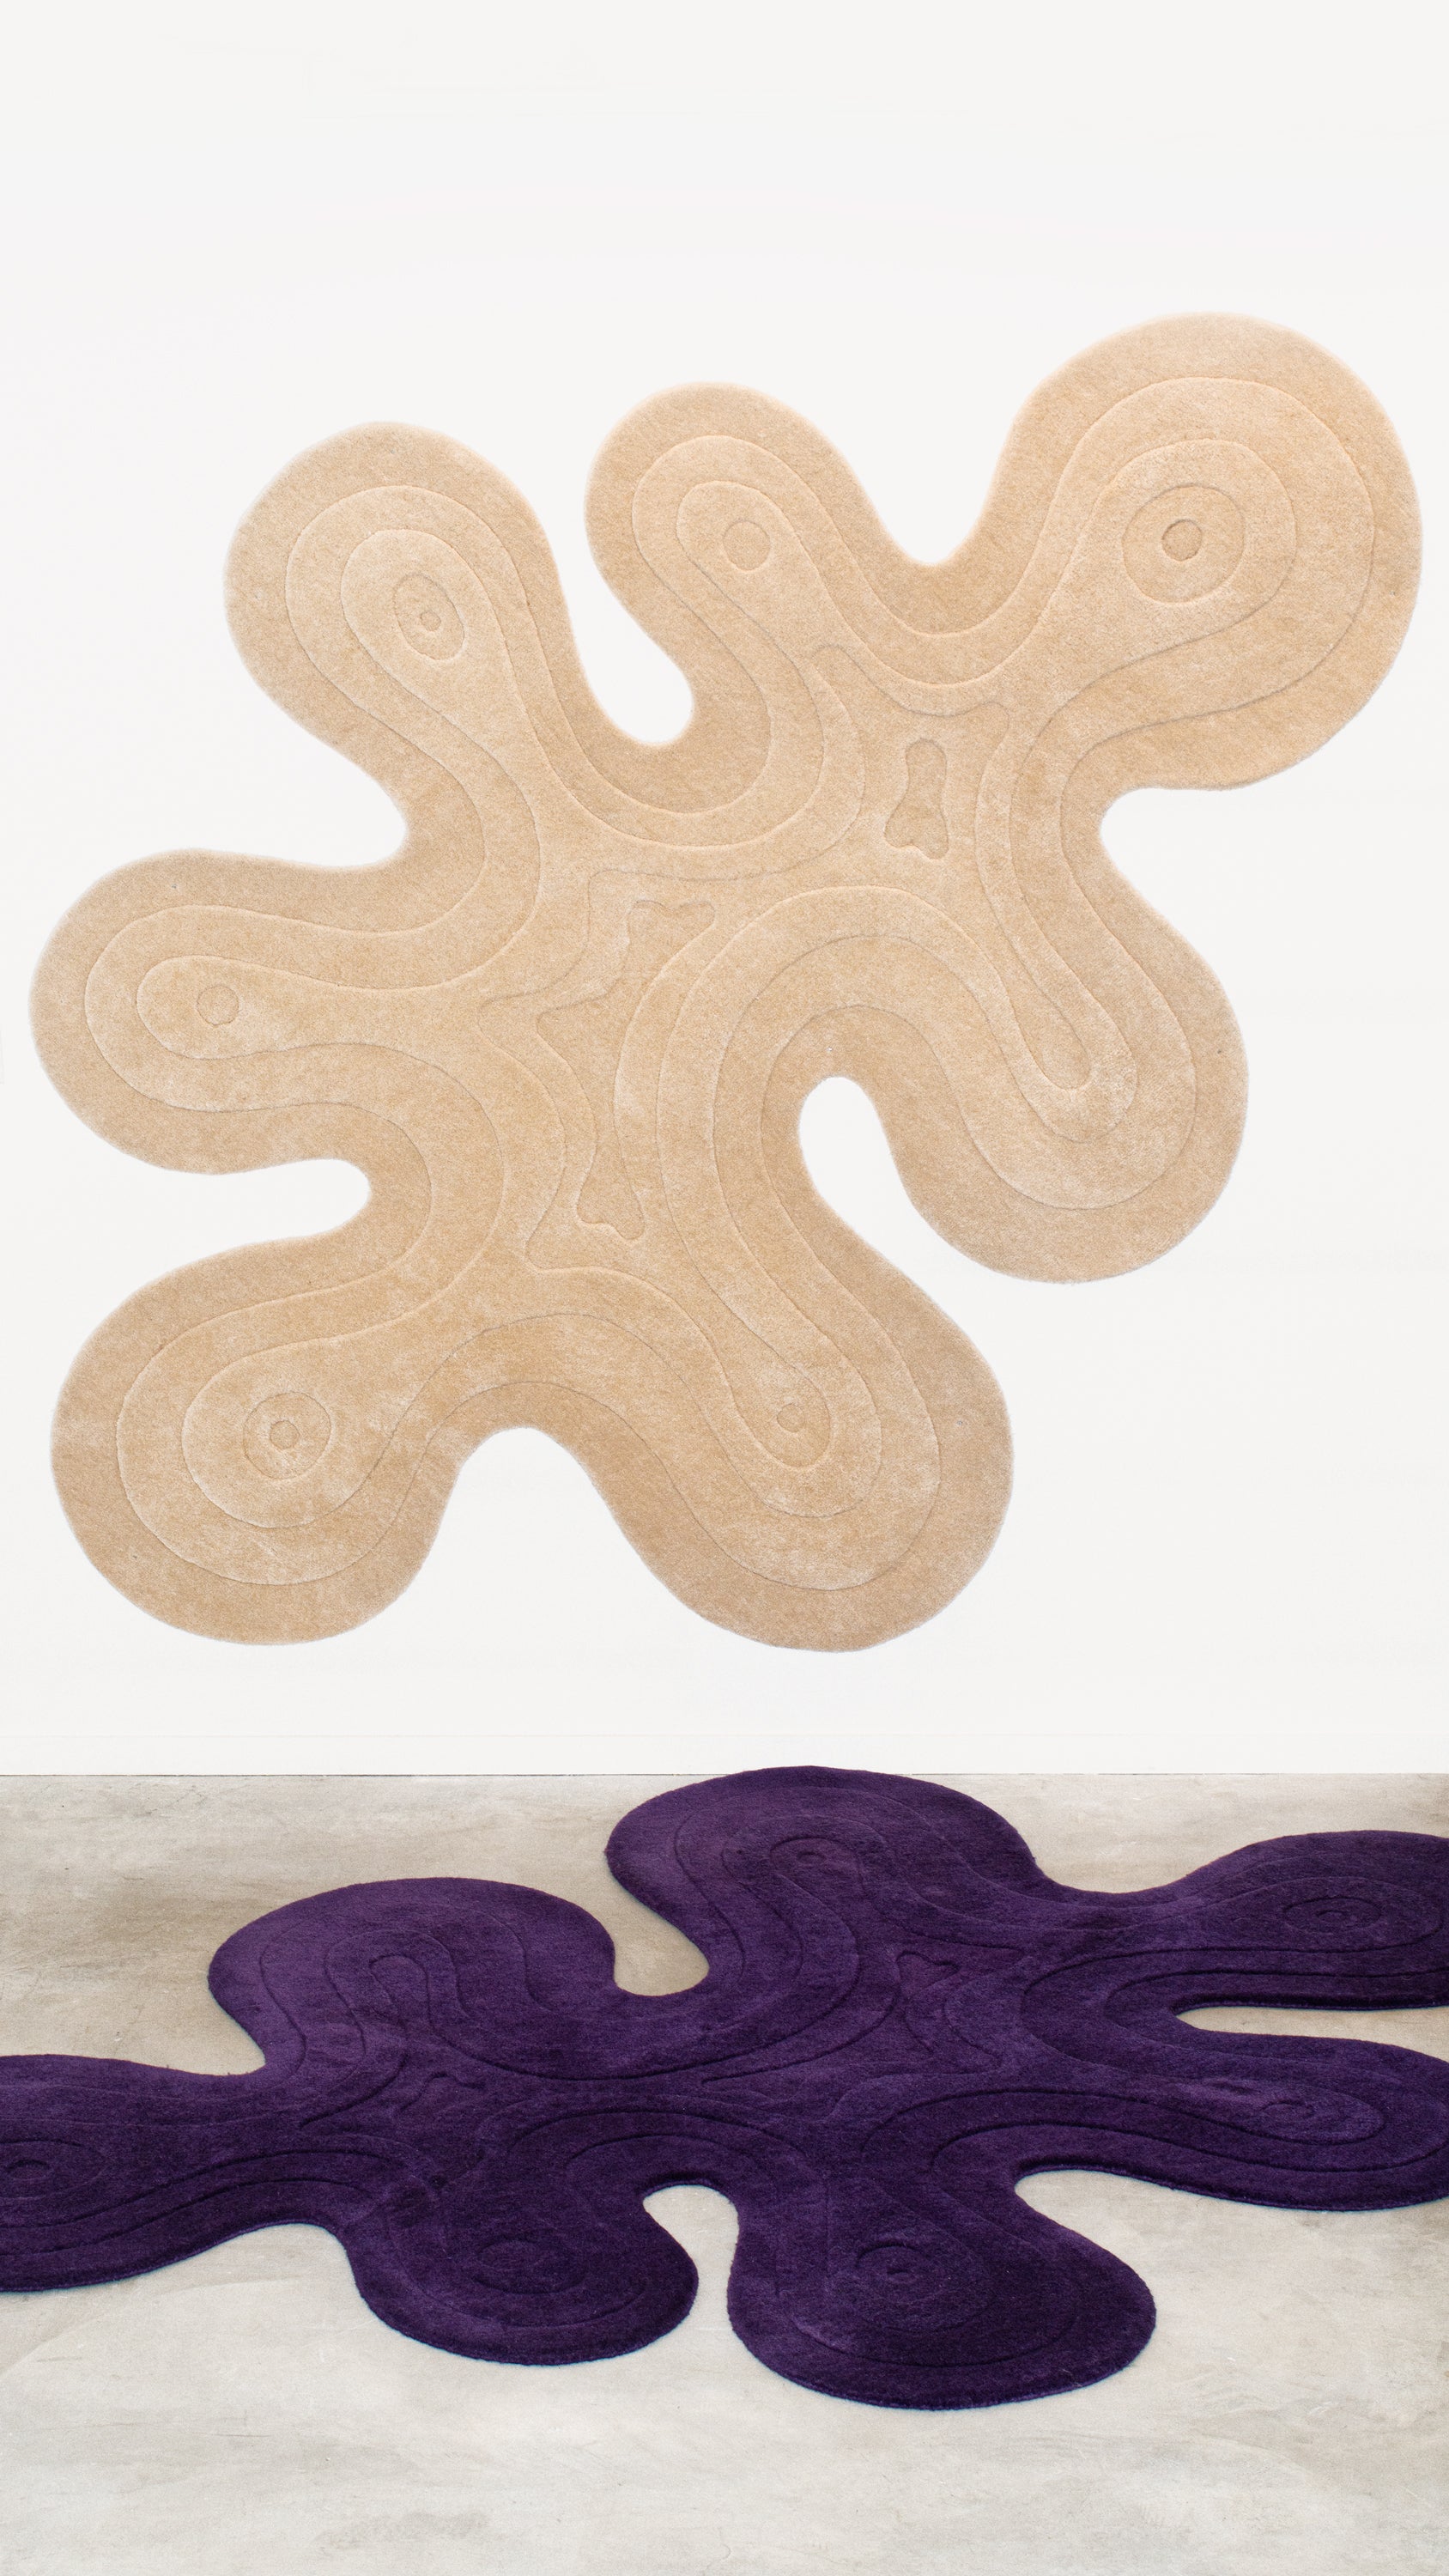 The Dune Rug in color ecru above the Dune Rug in a dark purple color. 